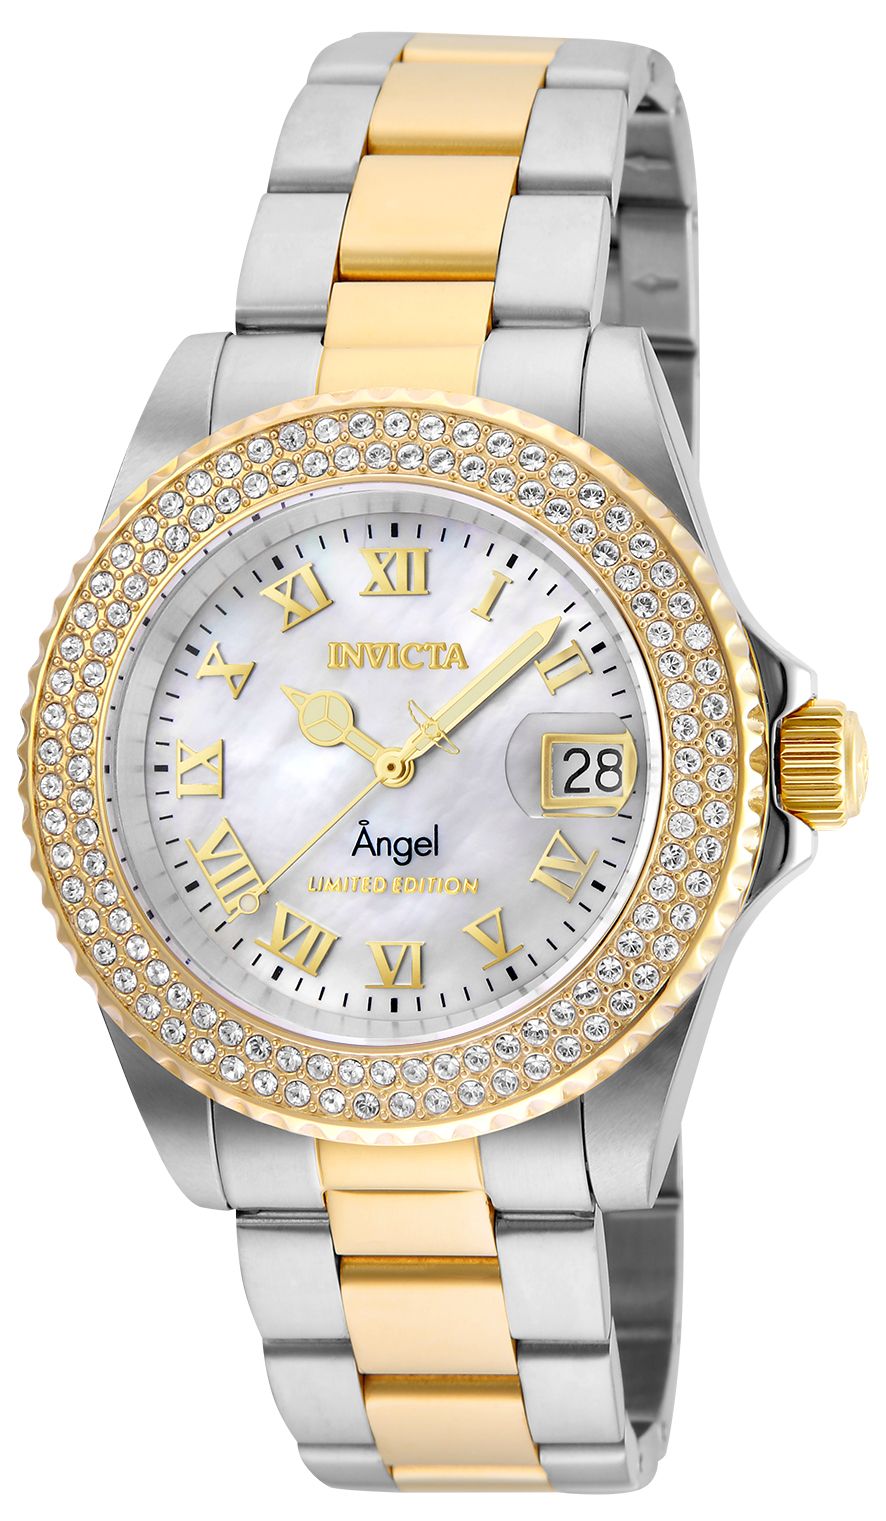 Invicta Angel Women's Watch w/ Mother of Pearl Dial - 40mm, Steel, Gold (24616)